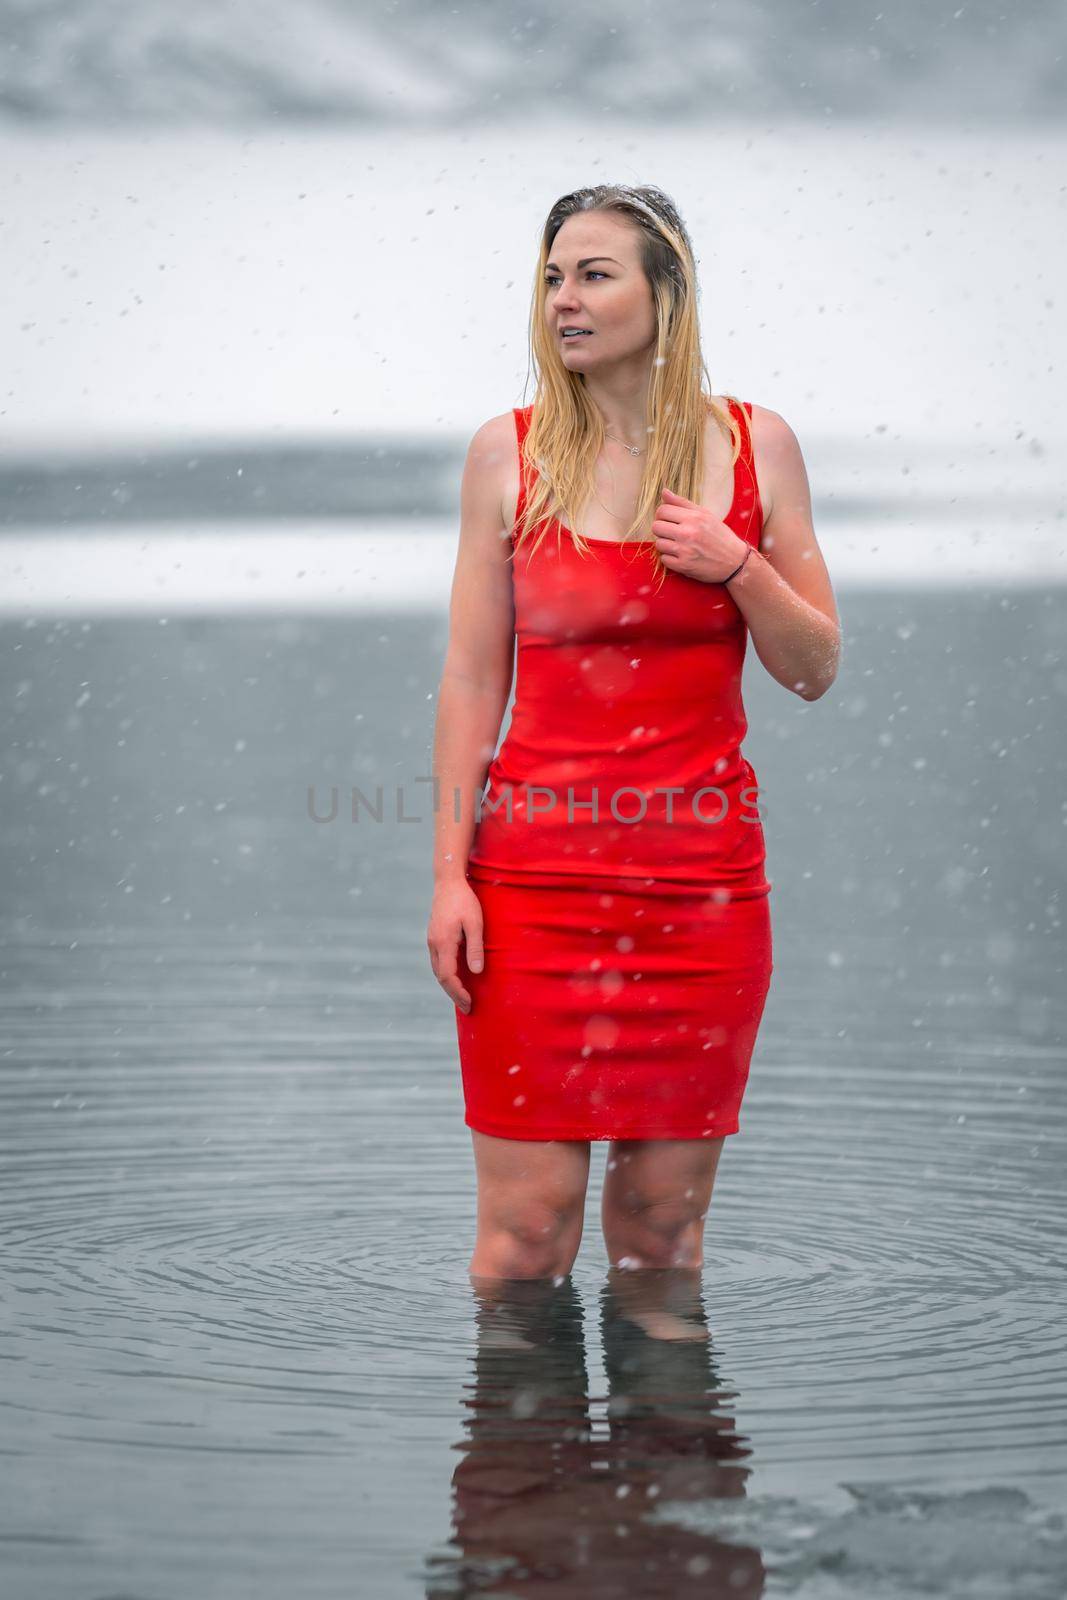 young beautiful woman in red dress by the snowy frozen lake in winter.